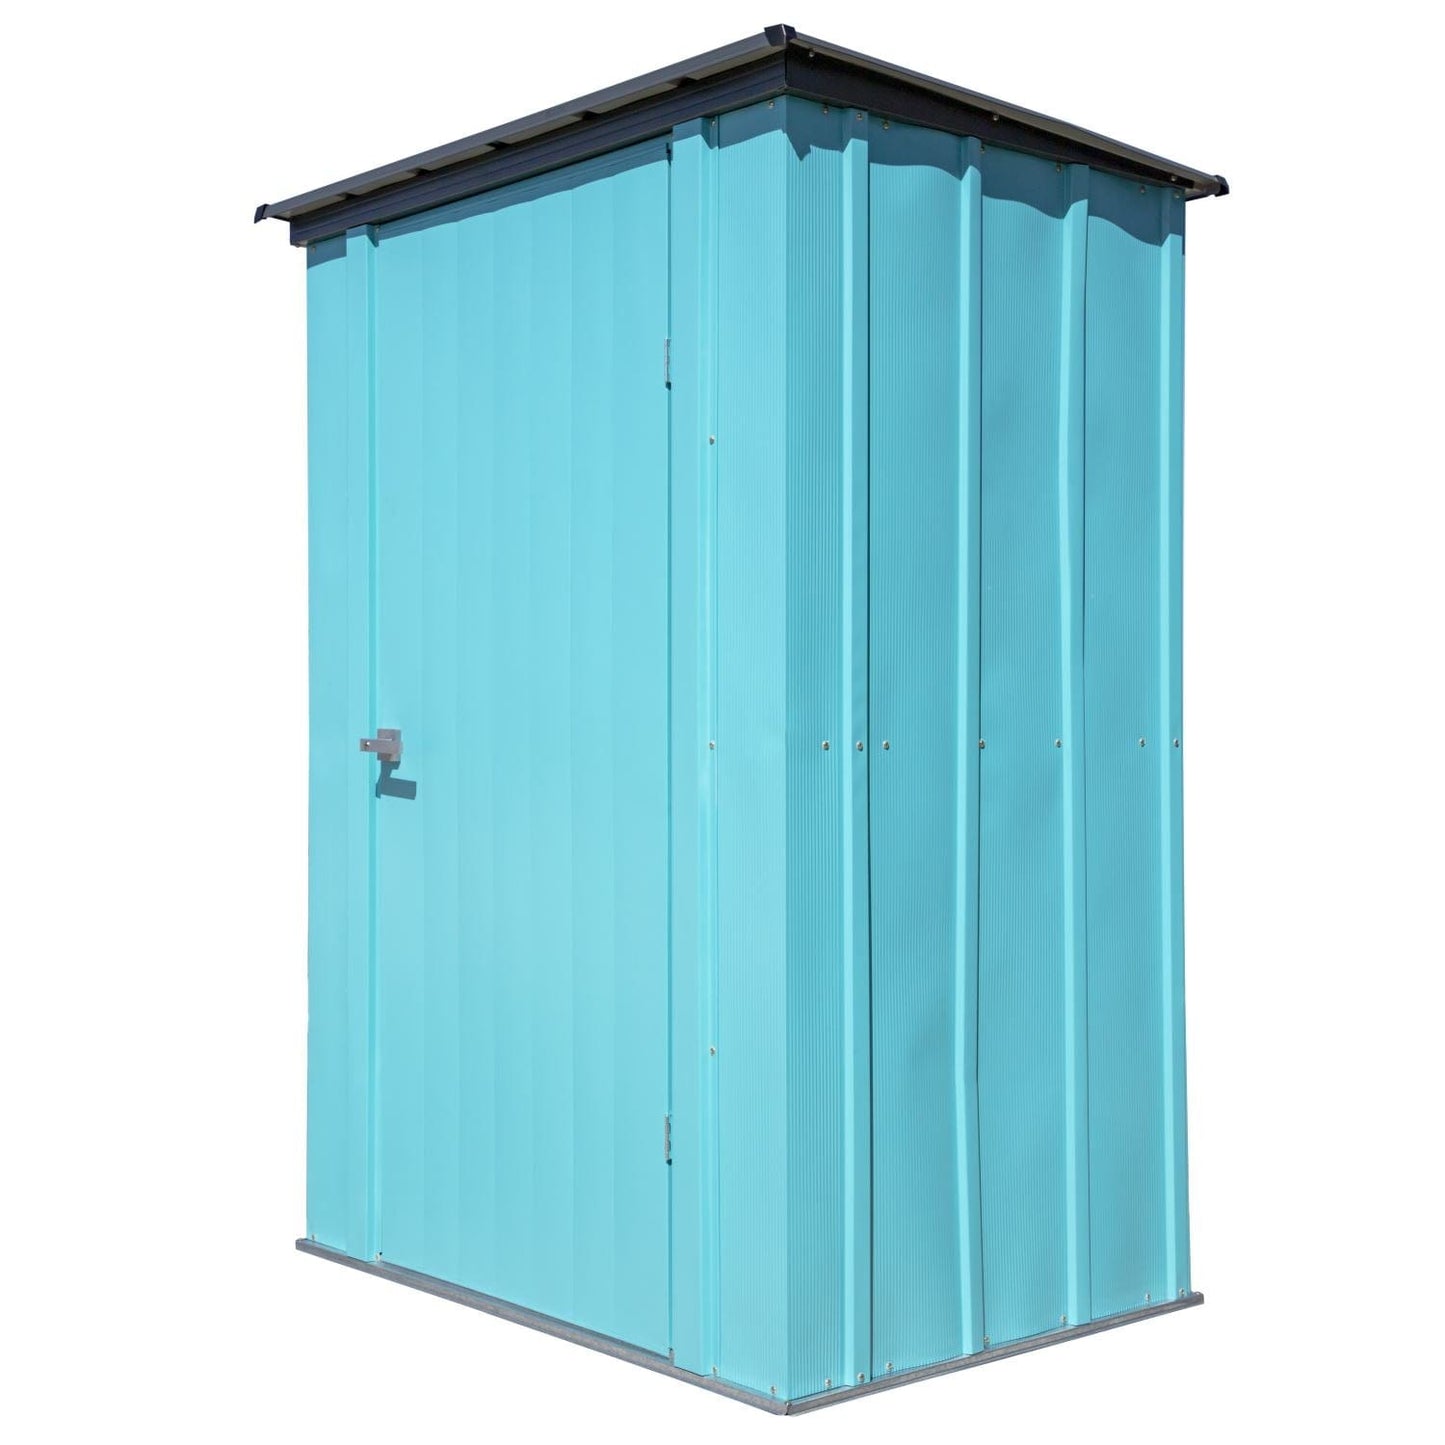 Spacemaker Metal Storage Shed Kit Spacemaker | Patio Shed, 4' x 3' x 6' - Teal and Anthracite CY43T21